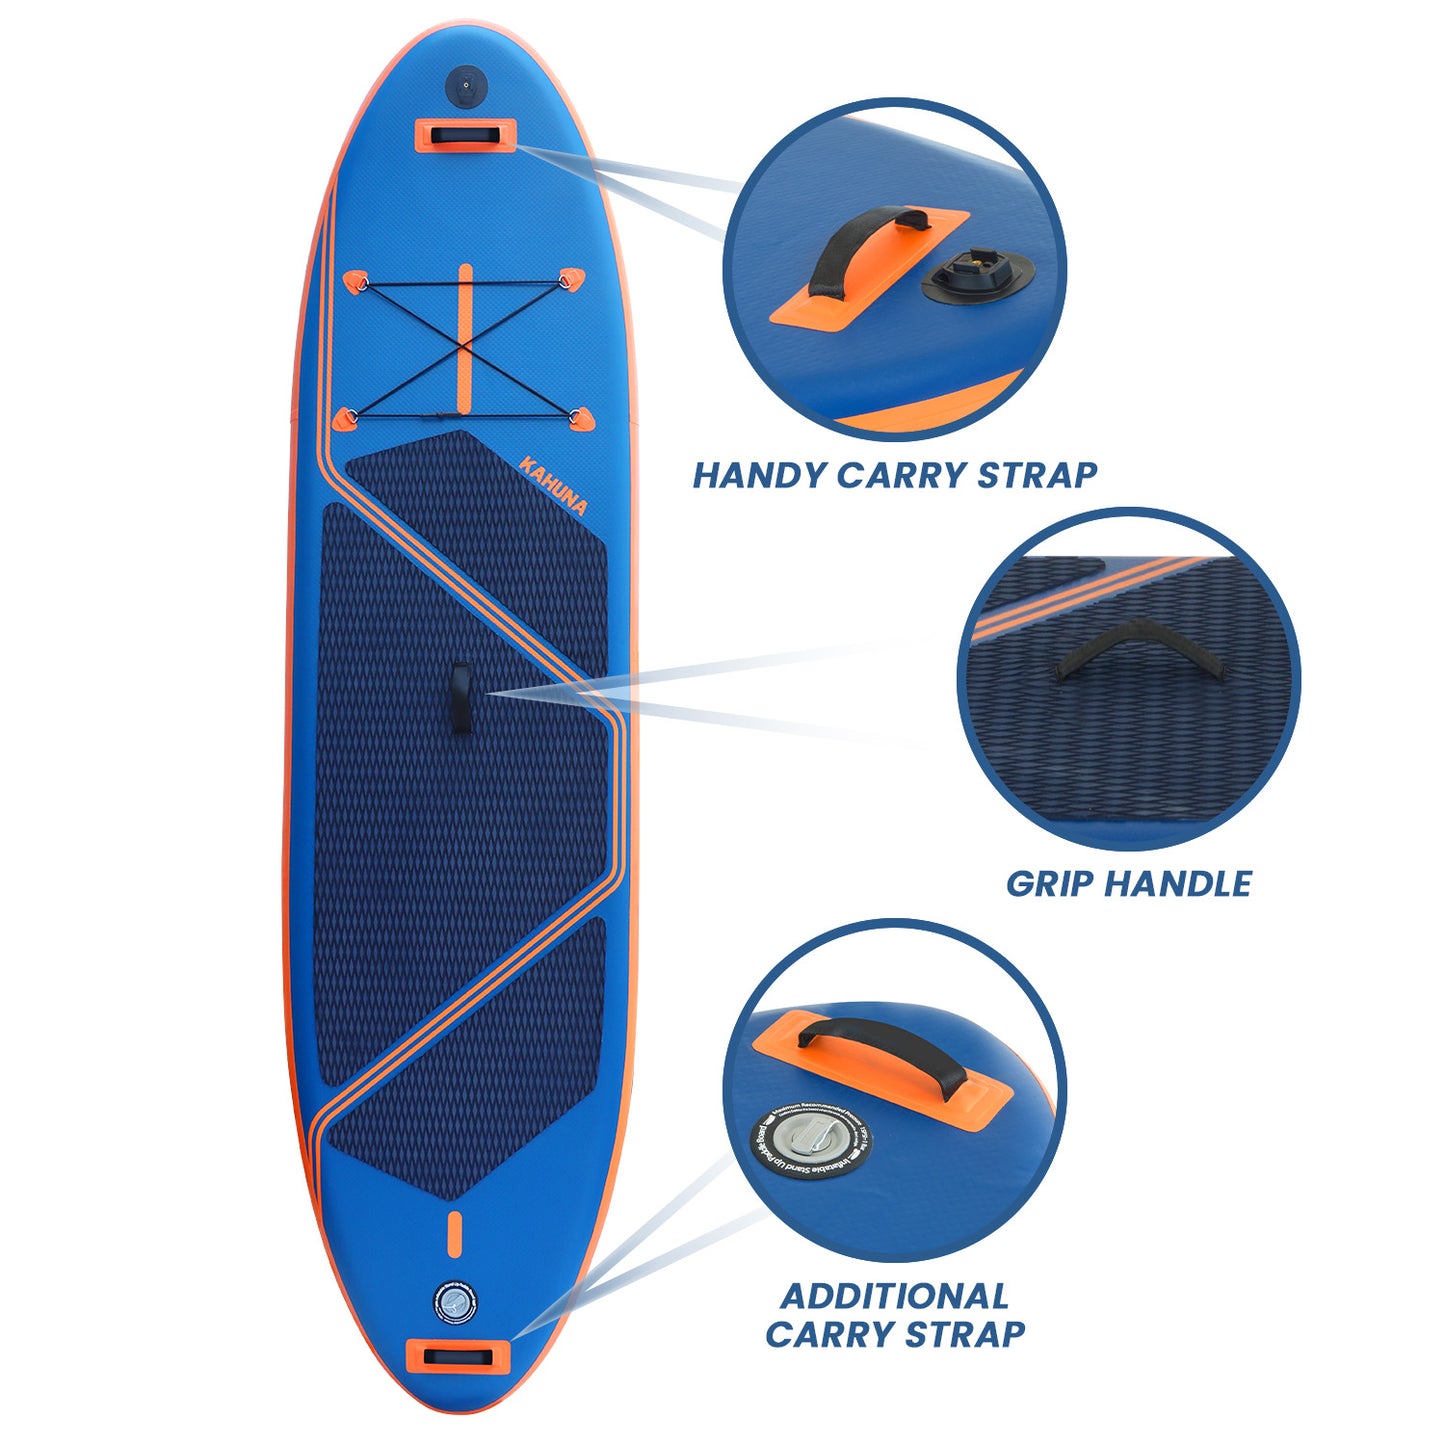 Premium 10.6FT Inflatable Paddle Board for Exciting Watersports Adventures